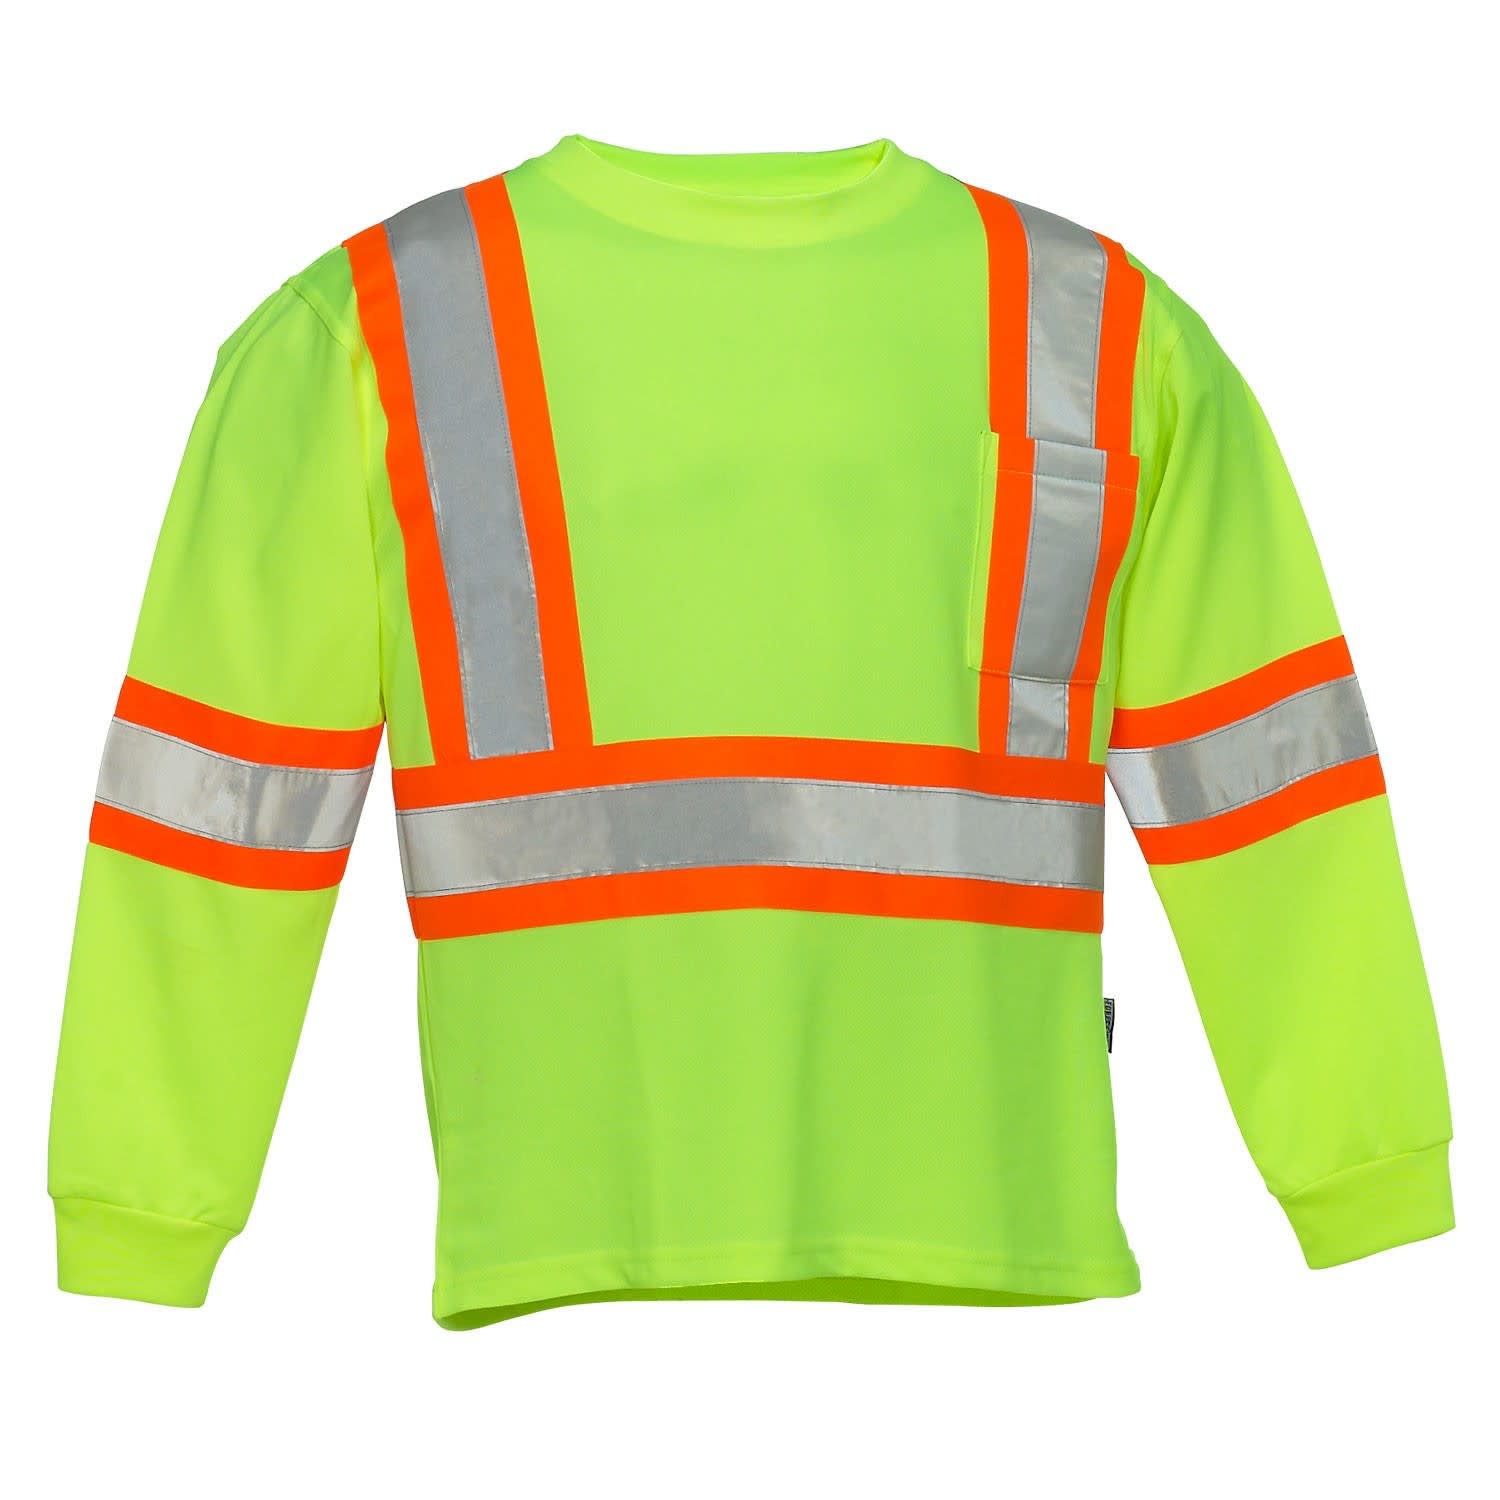 Forcefield long sleeve shirt #022-CBECSALYLS – lime, Large